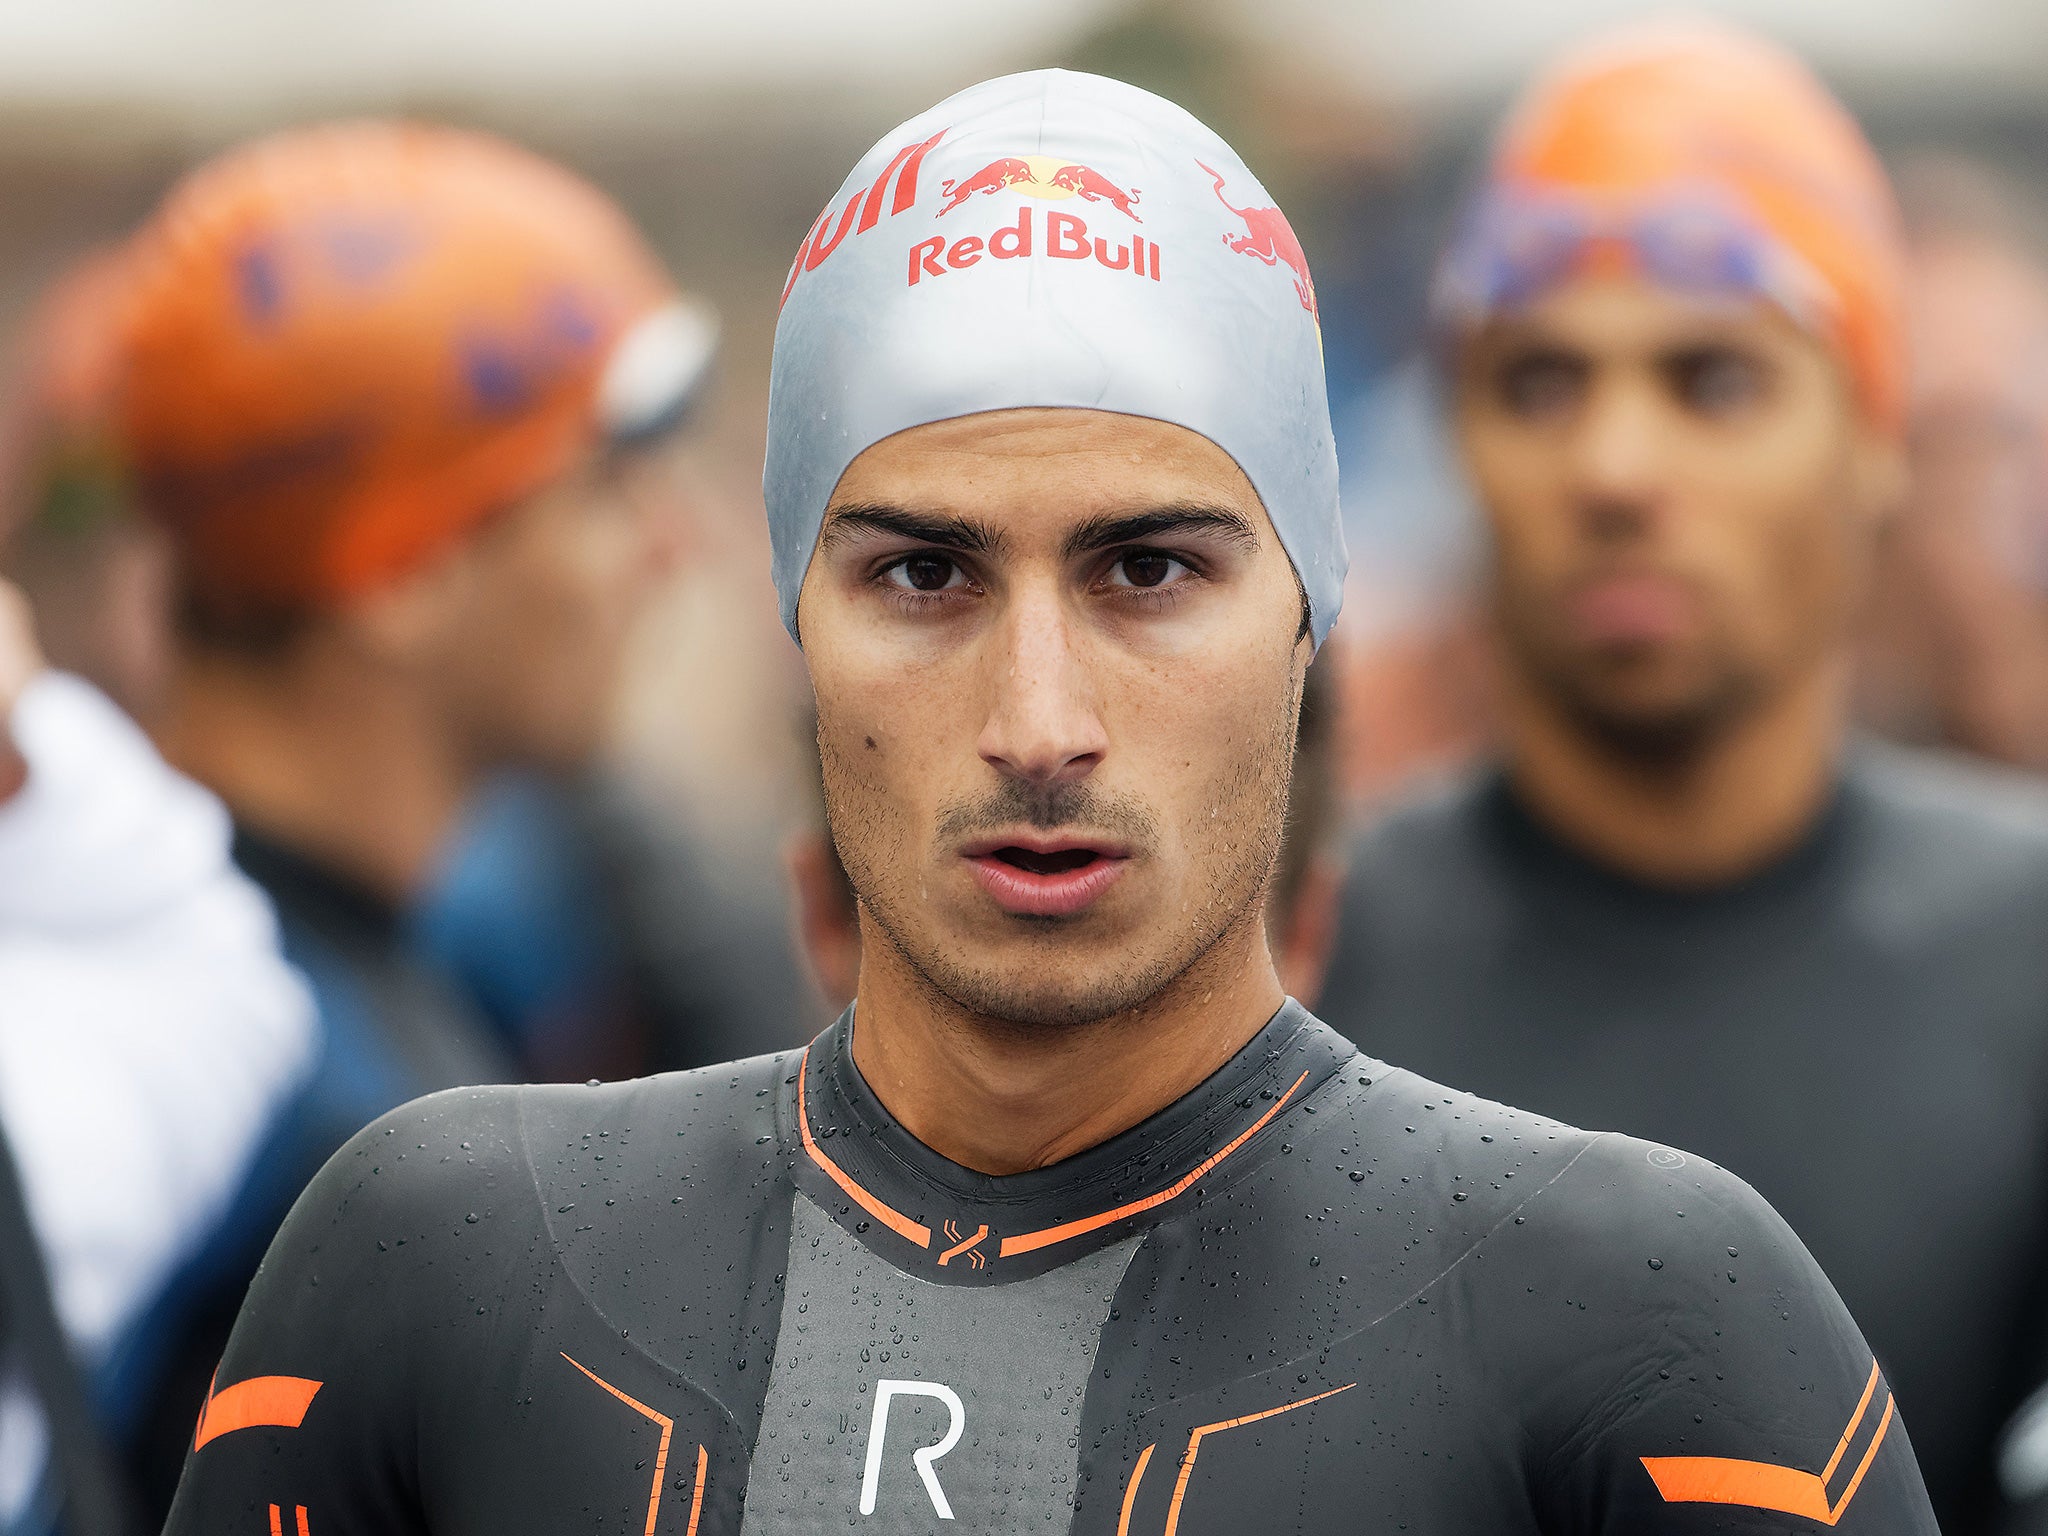 Mola, who was crowned this year's World Triathlon Series champion on Sunday